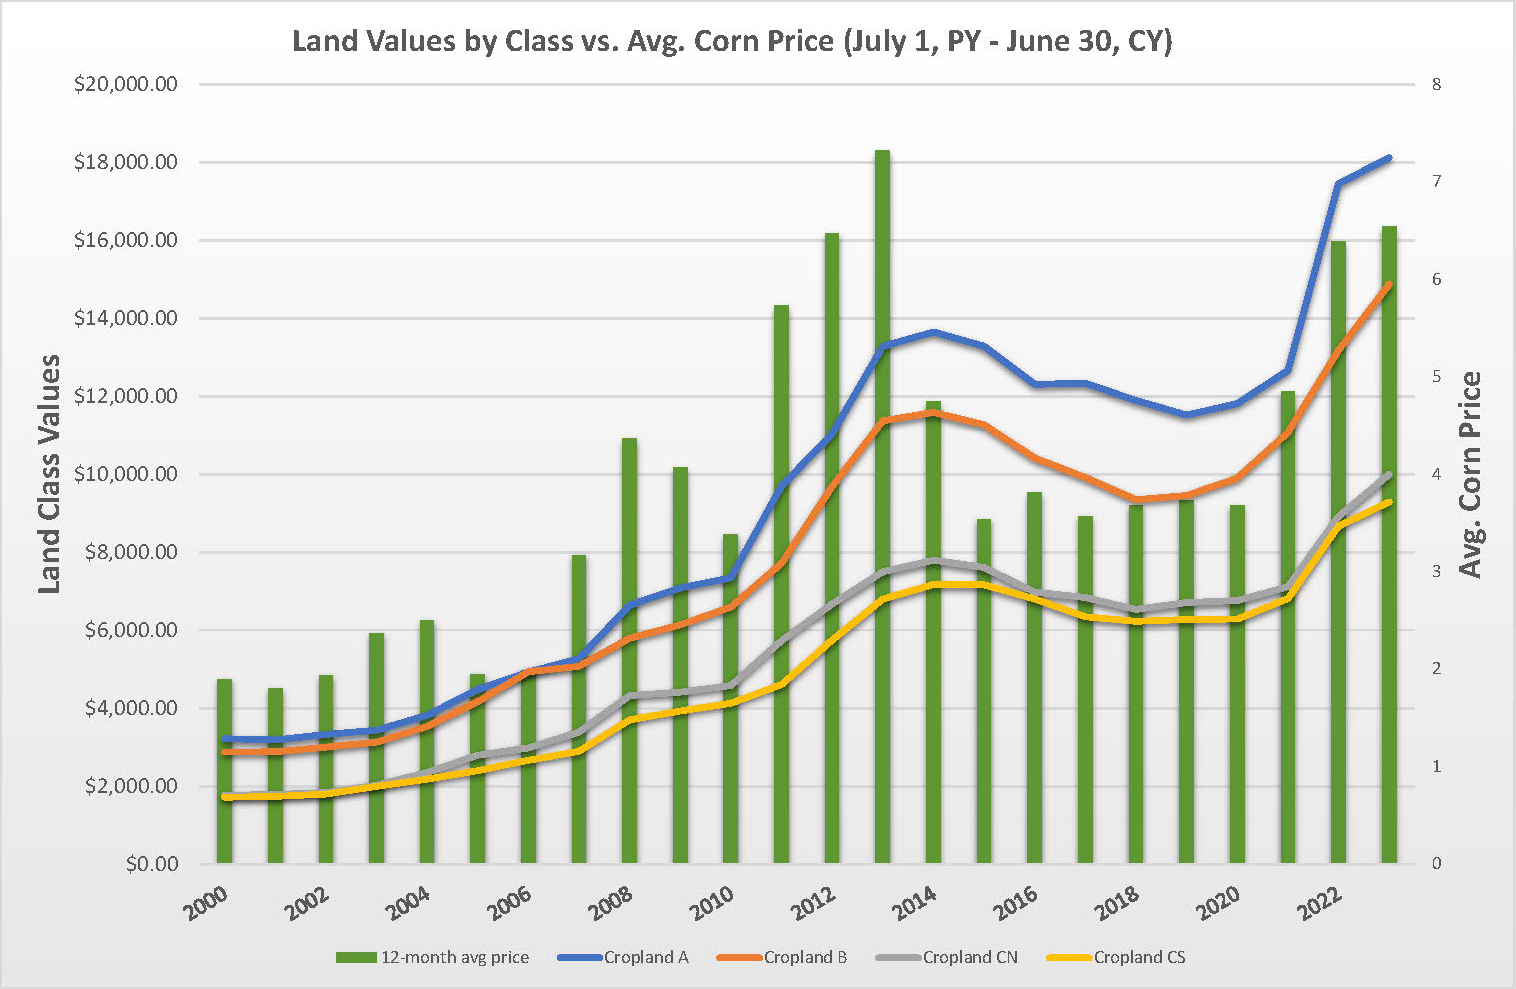 Land Values by Class vs Avg Corn Price updated